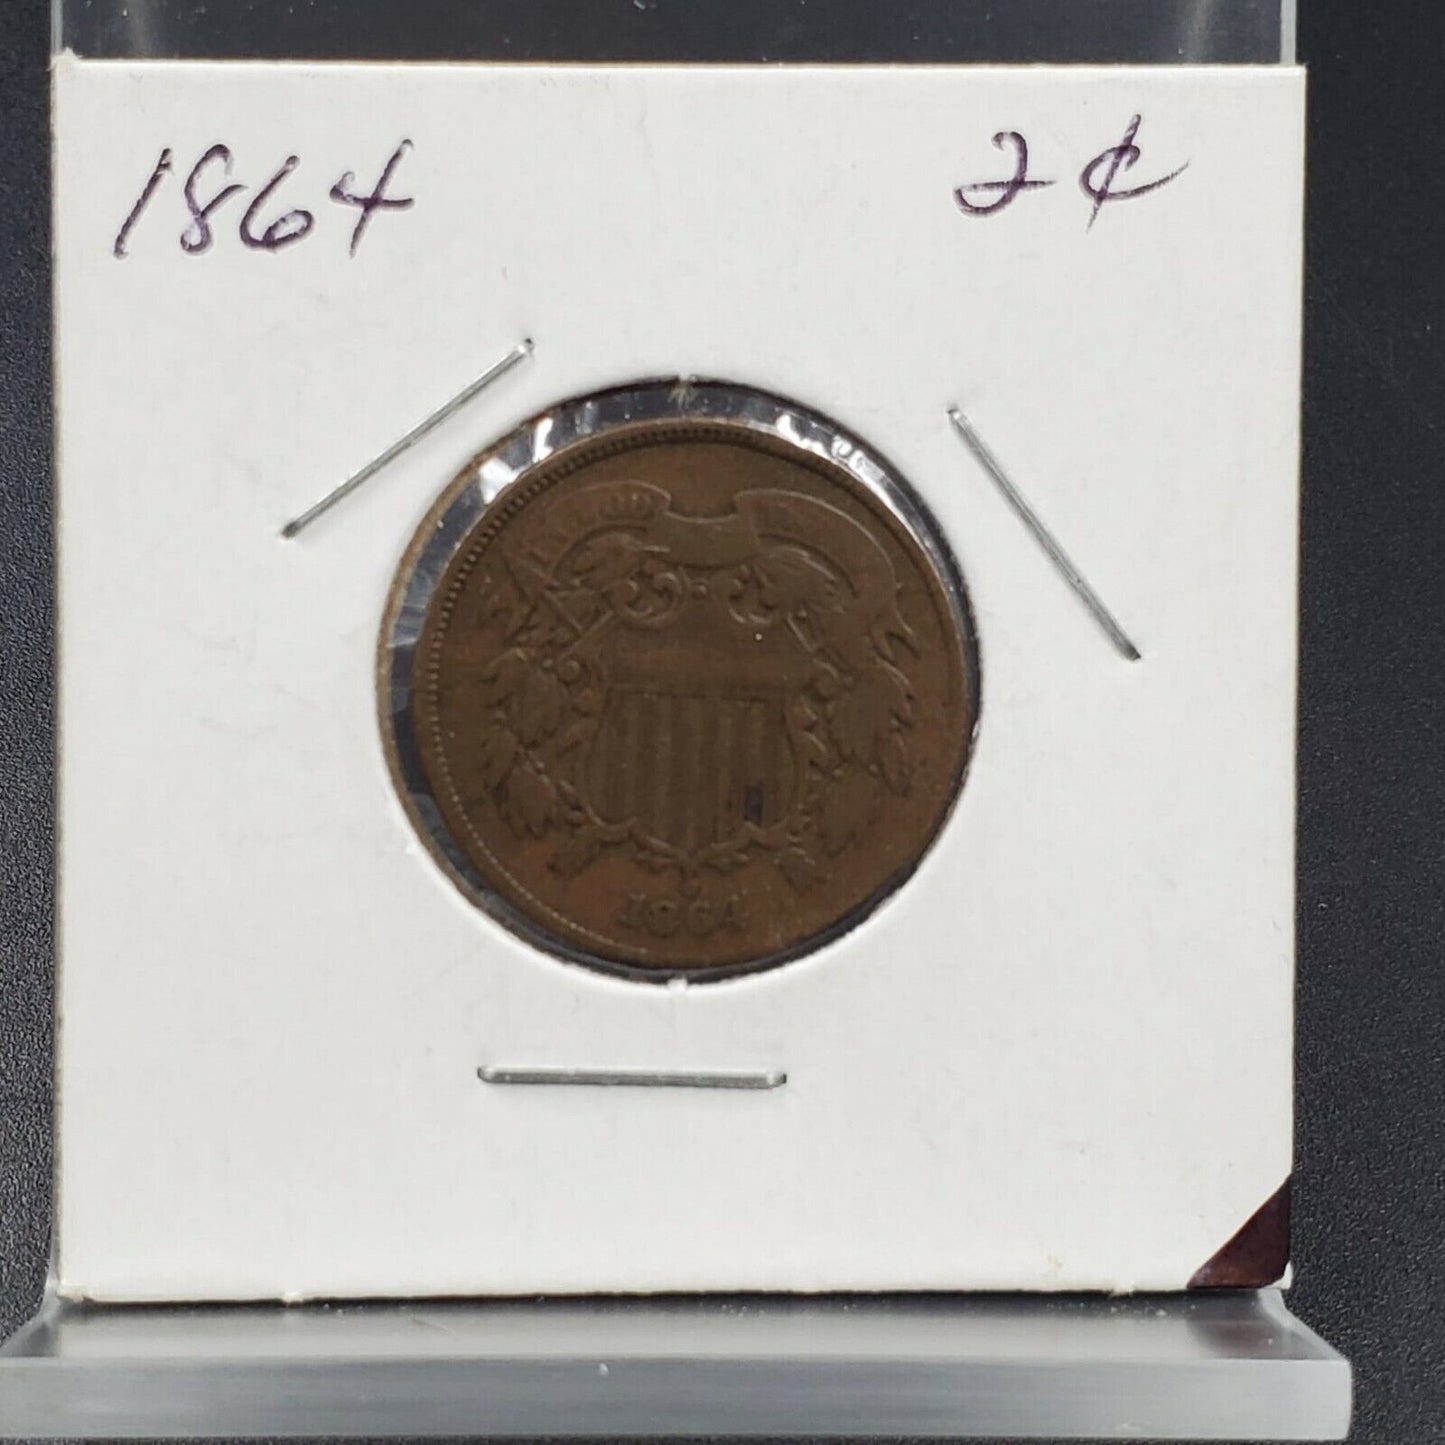 1864 P 2C Two Cent Copper Coin Piece VF Very Fine Slight Misaligned LG Motto